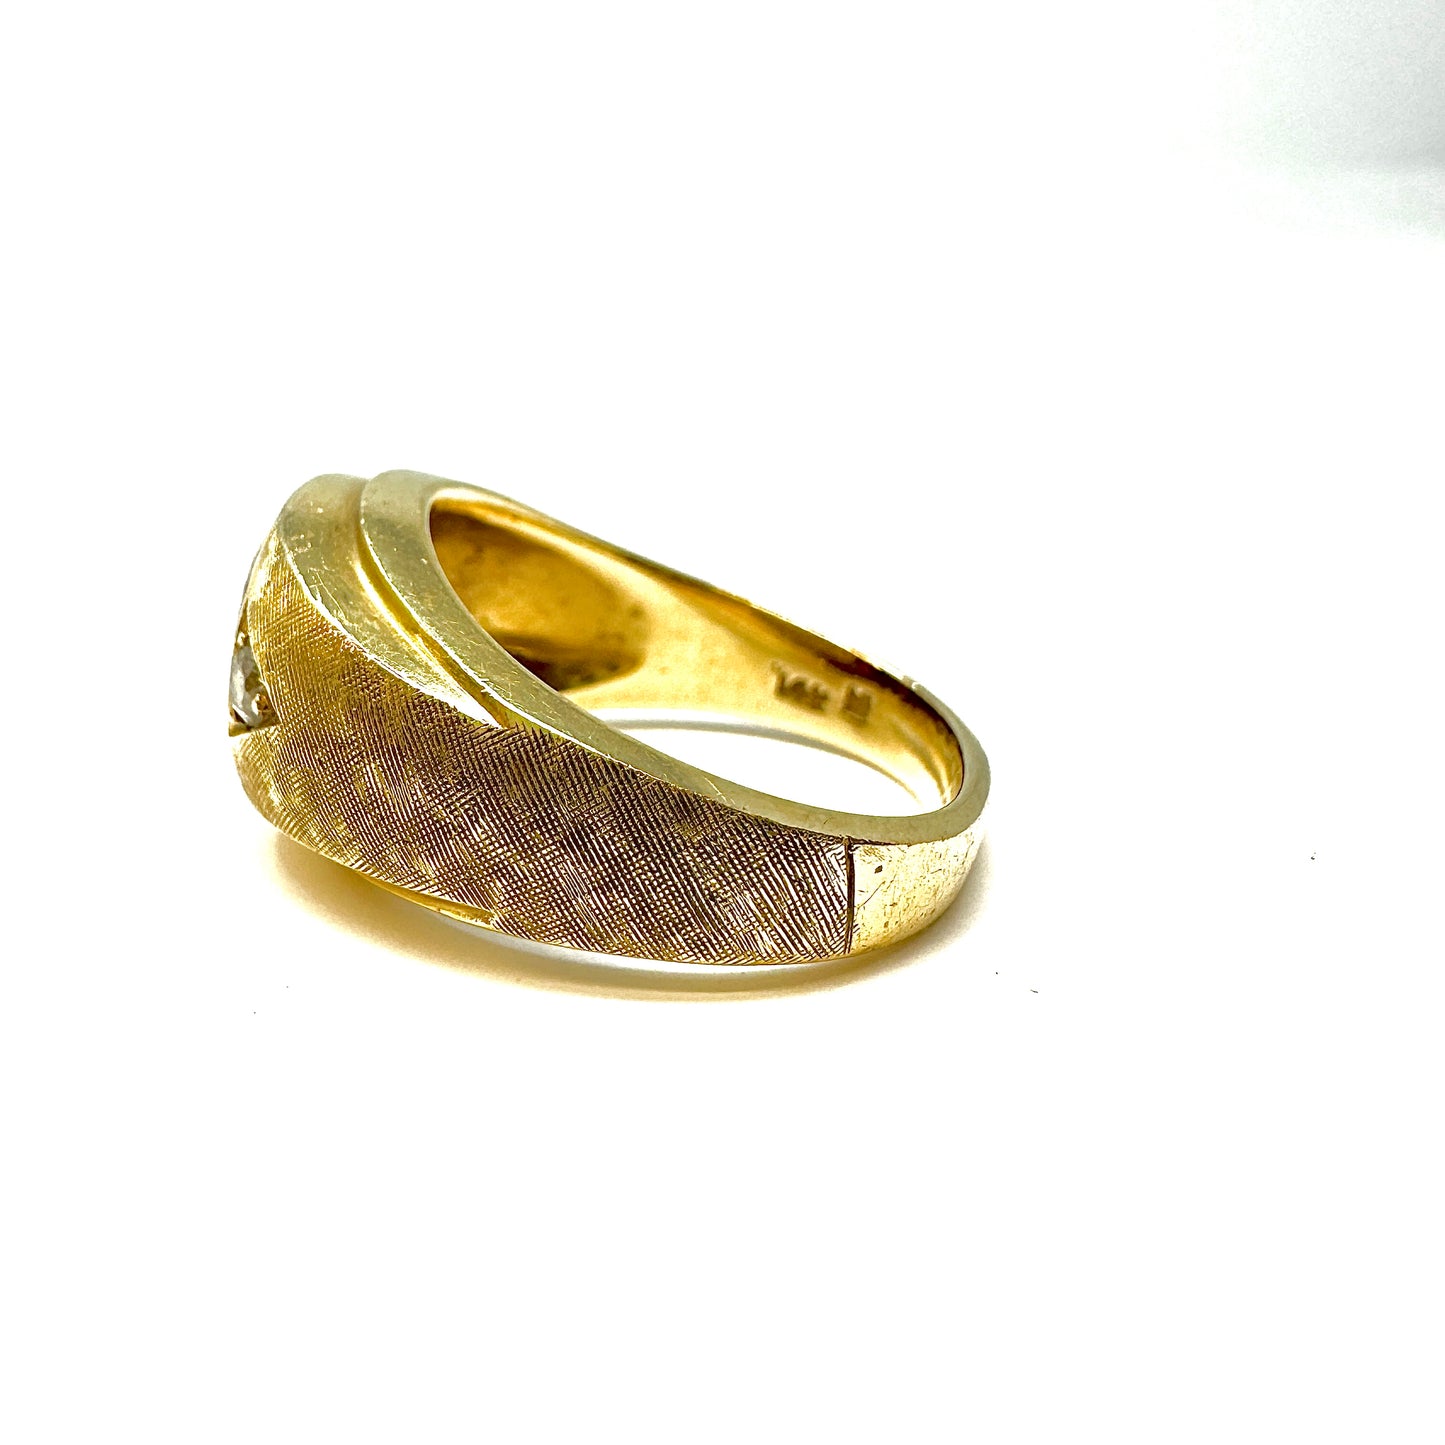 14K Gold Men's Ring with Garnet and Diamond